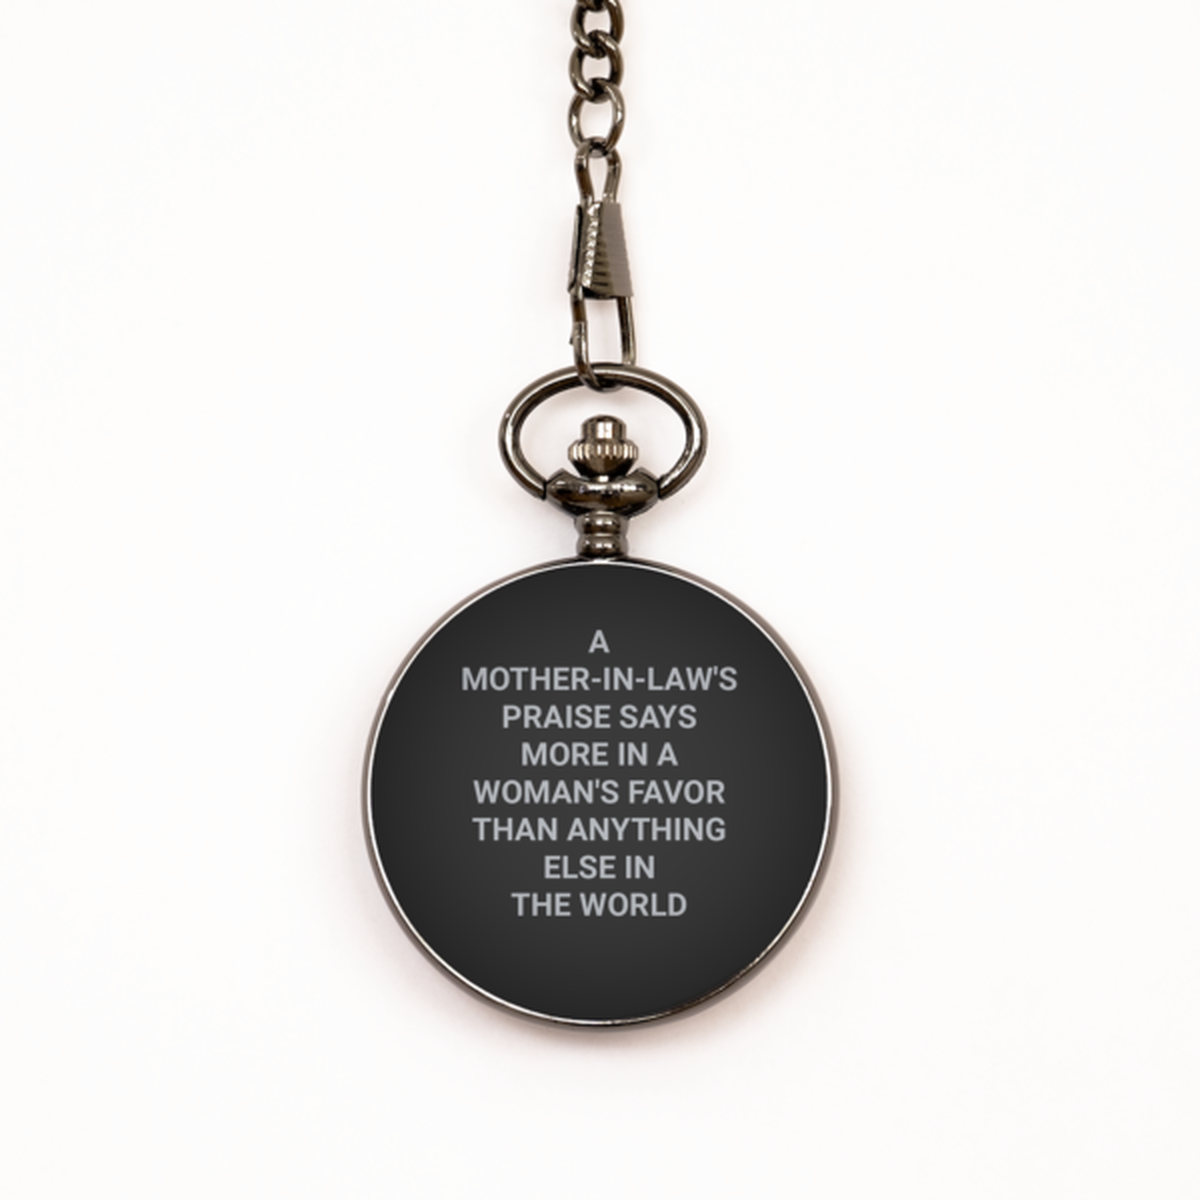 To My Mother-In-Law Black Pocket Watch, Woman'S Favor, Valentines Gifts For Mother-In-Law From Daughter-In-Law, Birthday Gifts For Women